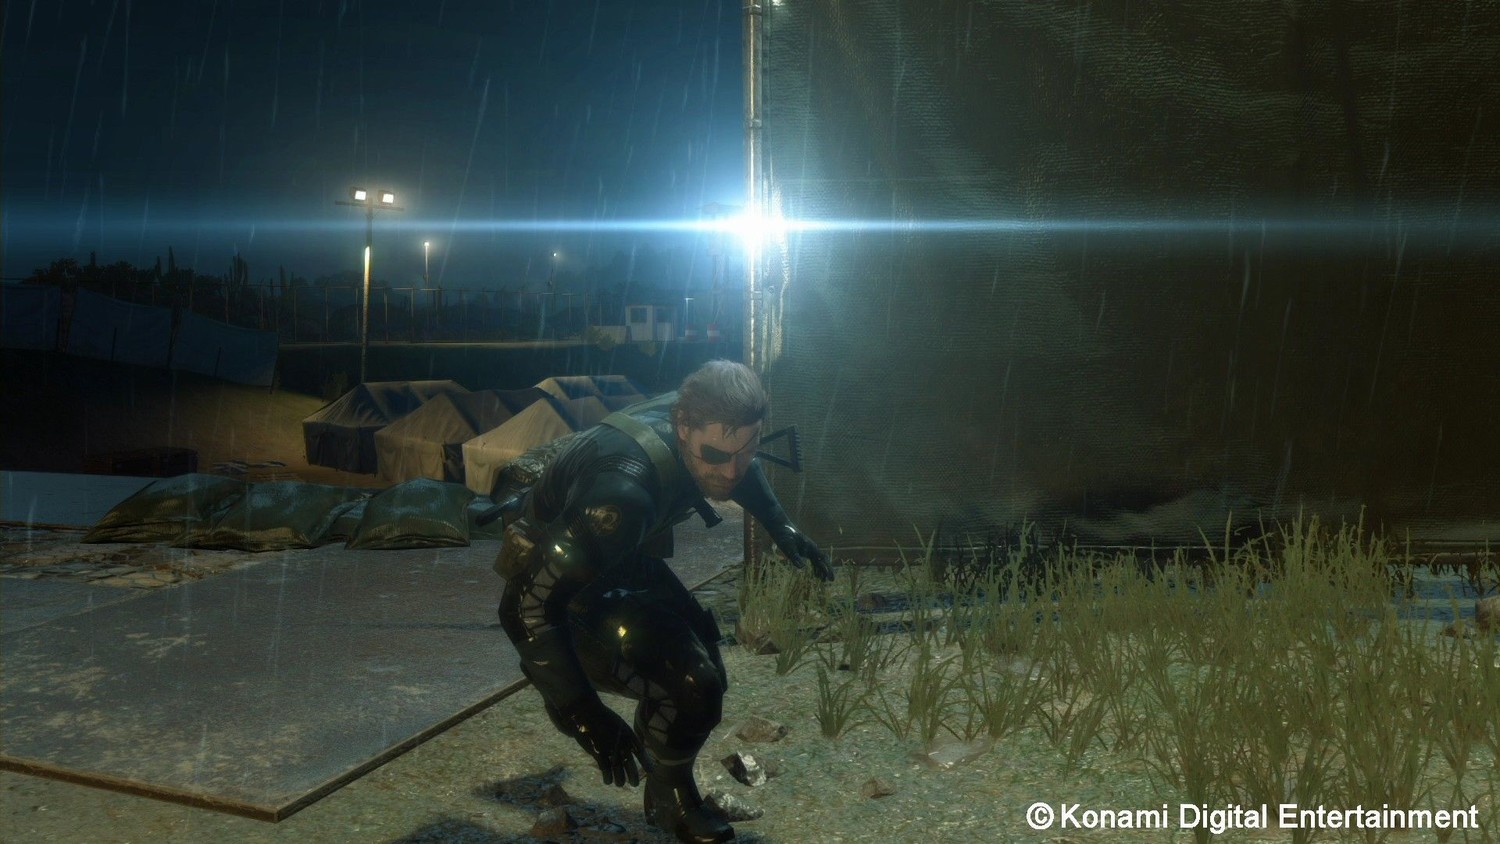 Скриншот 2 к игре Metal Gear Solid V: Ground Zeroes [v1.005] (2014) PC | Repack by xatab